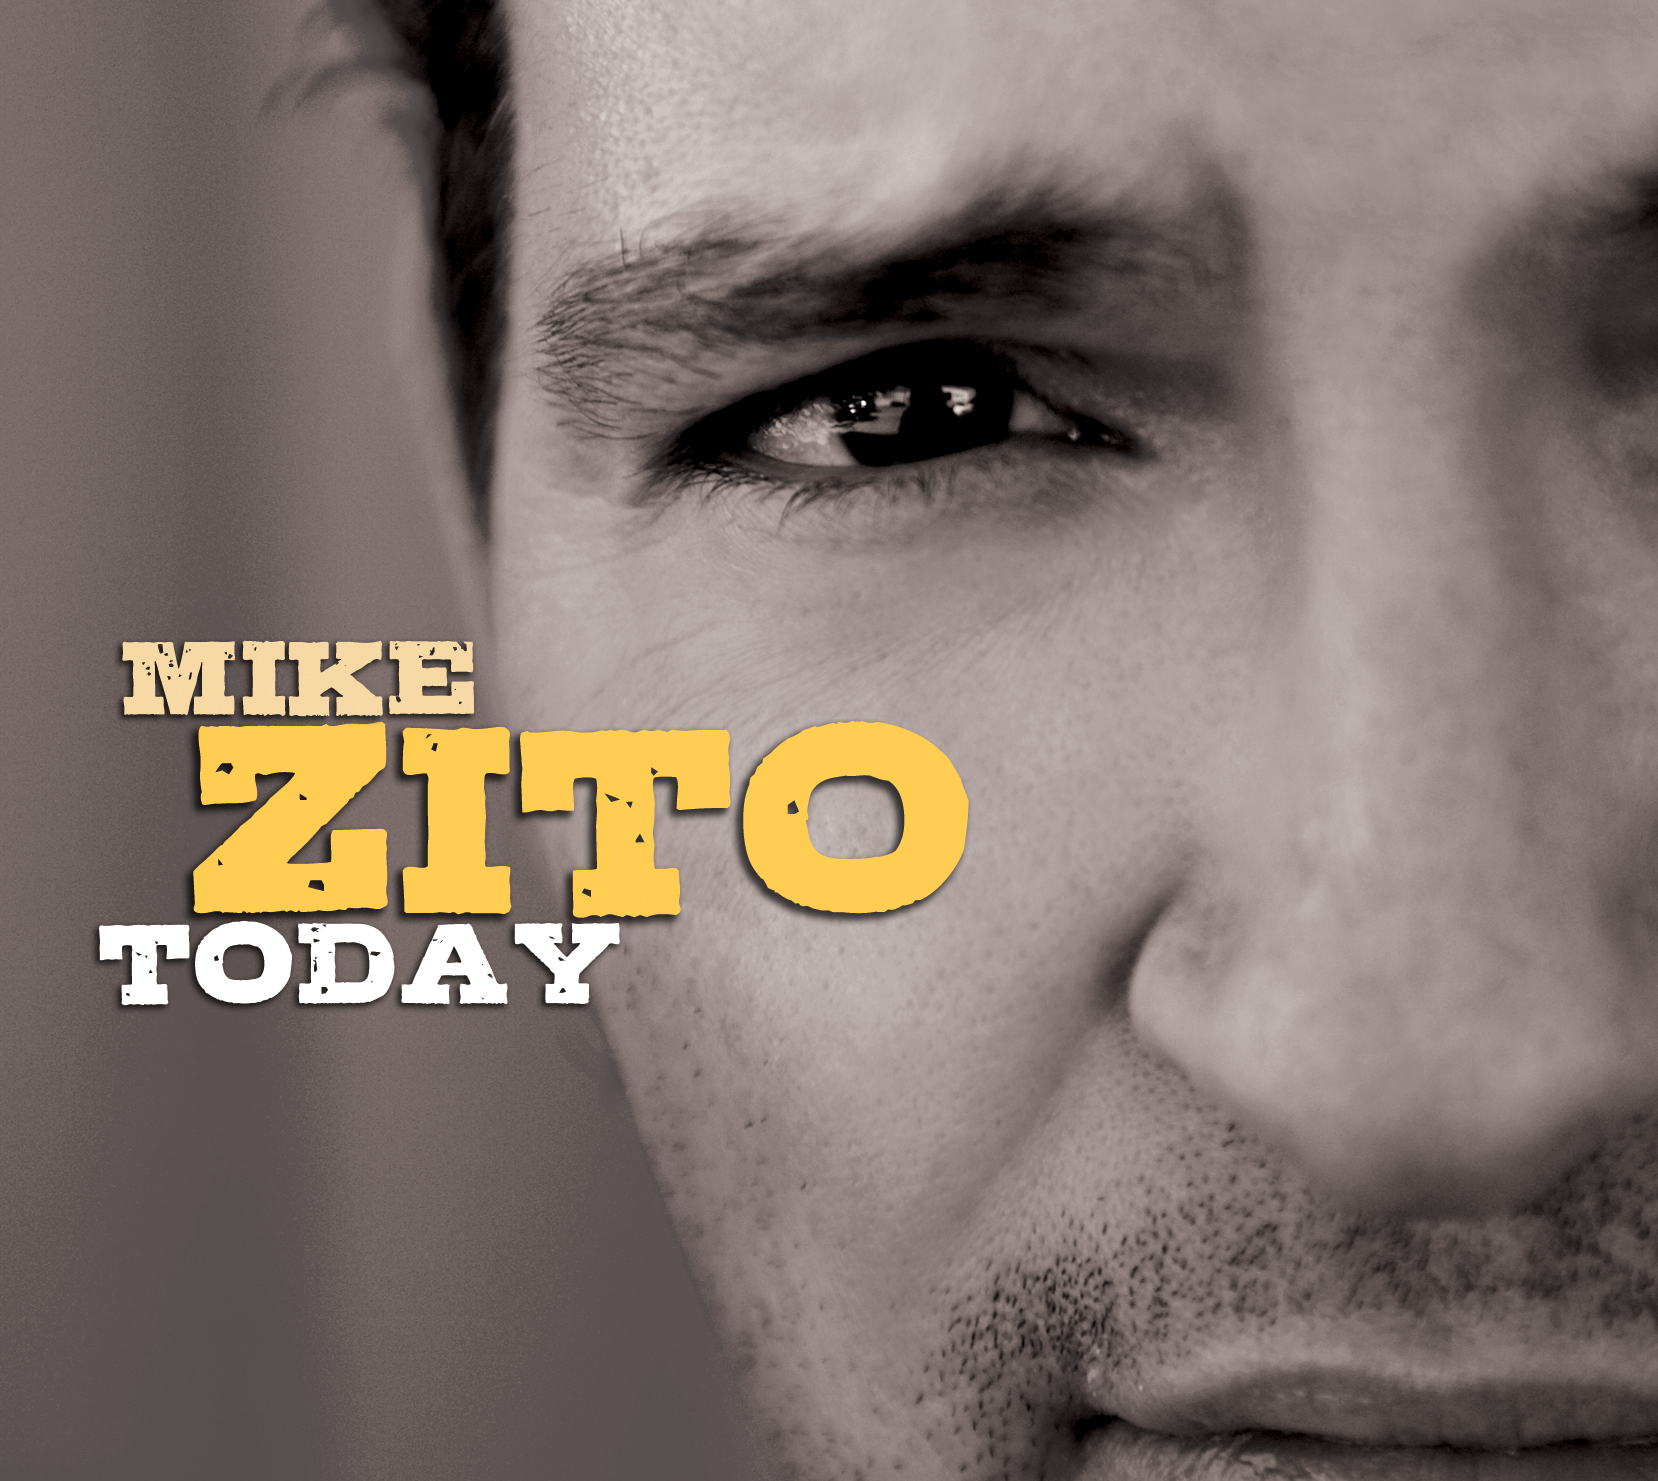 Mike Zito